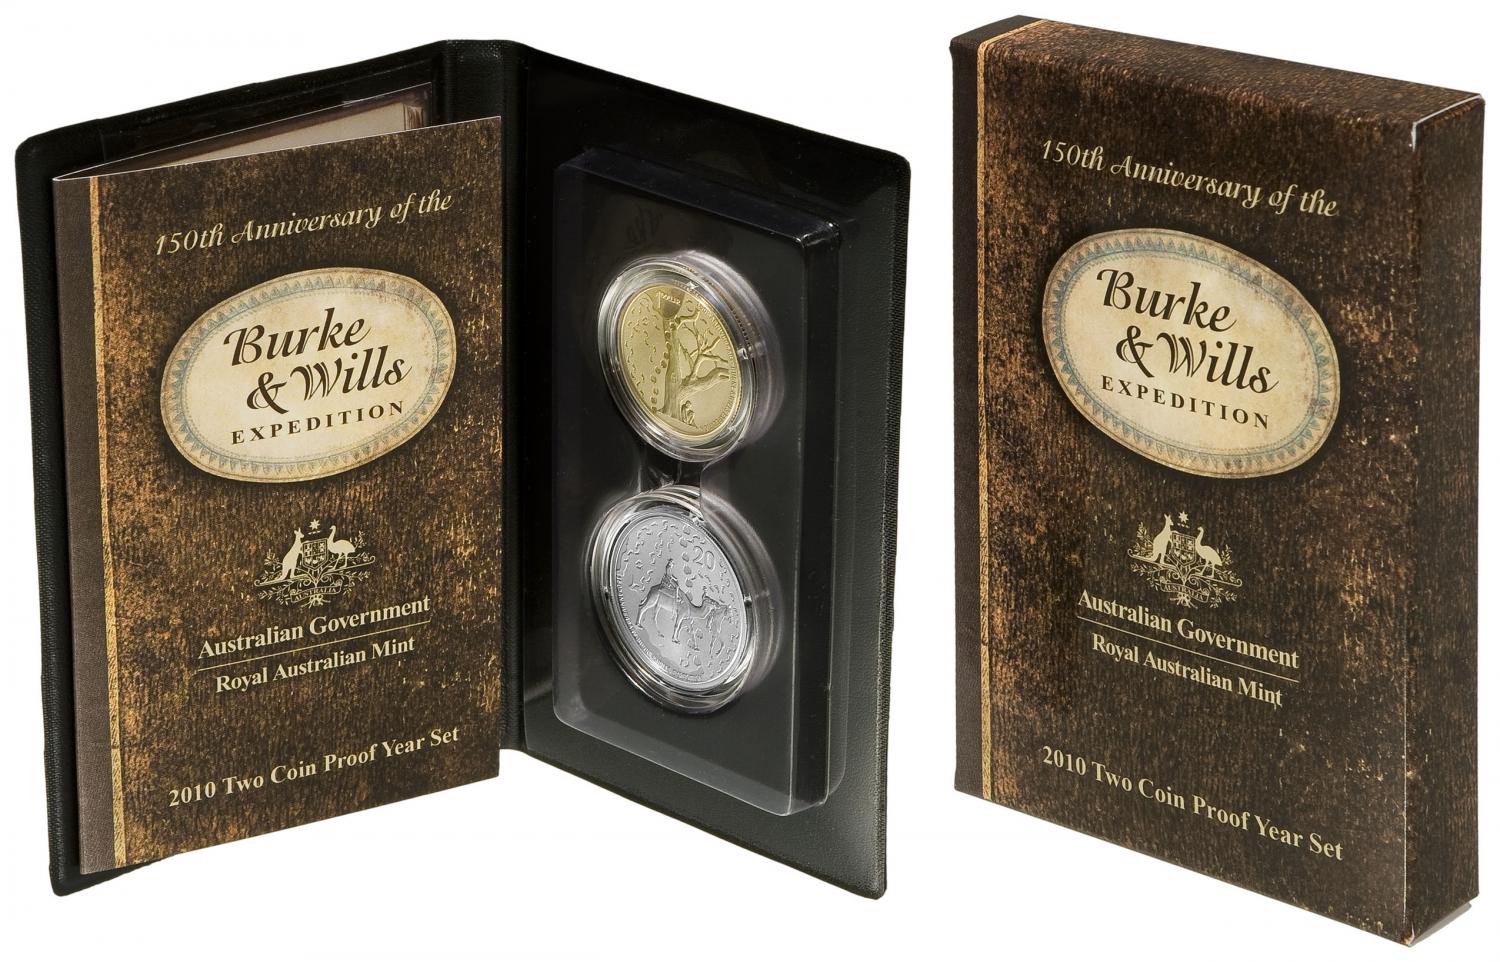 Thumbnail for 2010 Two Coin Proof Set - 150th Anniversary of the Burke & Wills Expedition